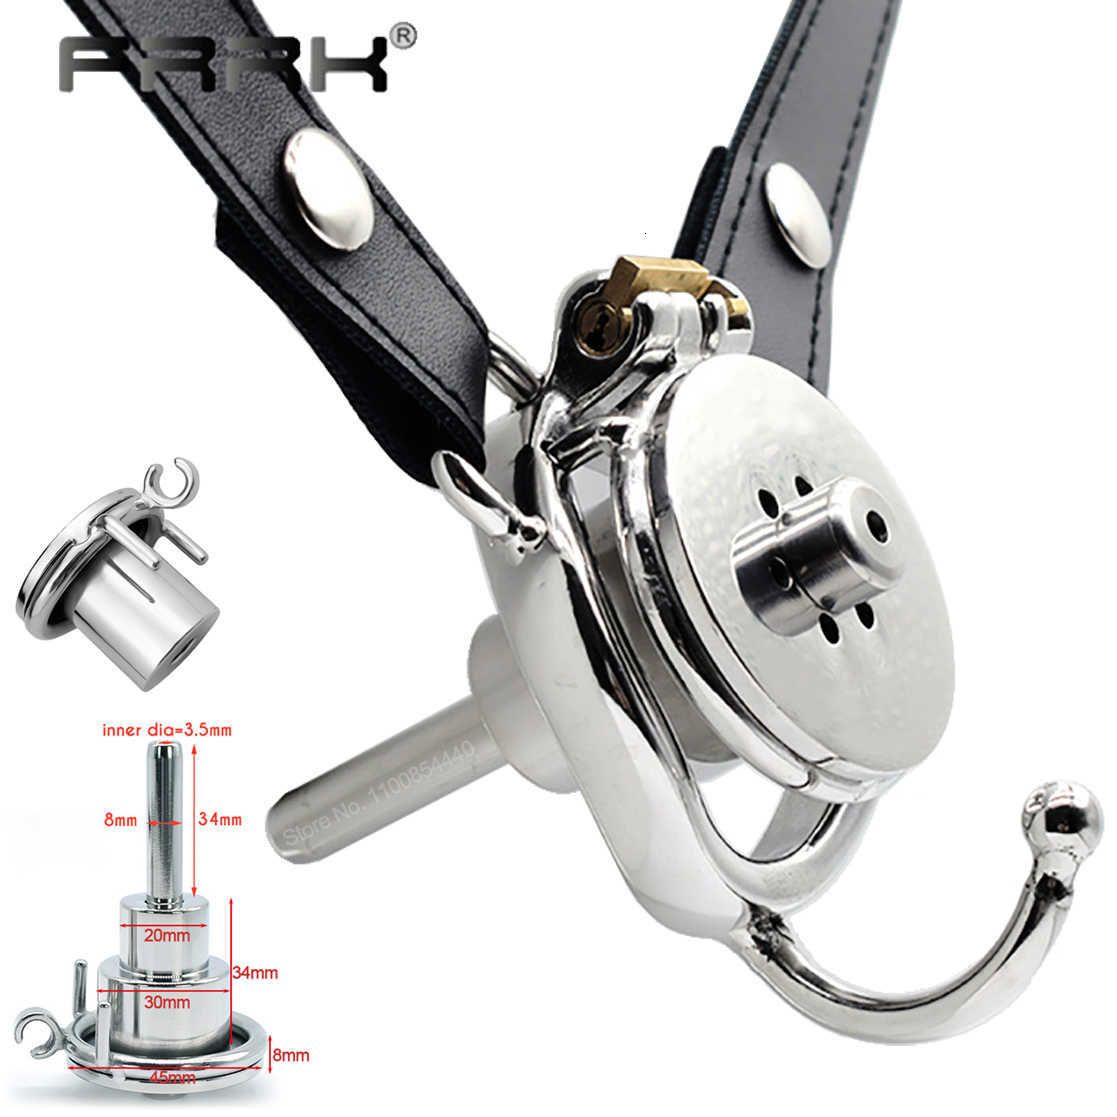 Stainless Steel Inverted Plugged Small Short Male Chastity Device Metal Cock Cage Penis Lock Adult BDSM Slave Games Men Sex Toys From Sextoy_007, $16.11 DHgate